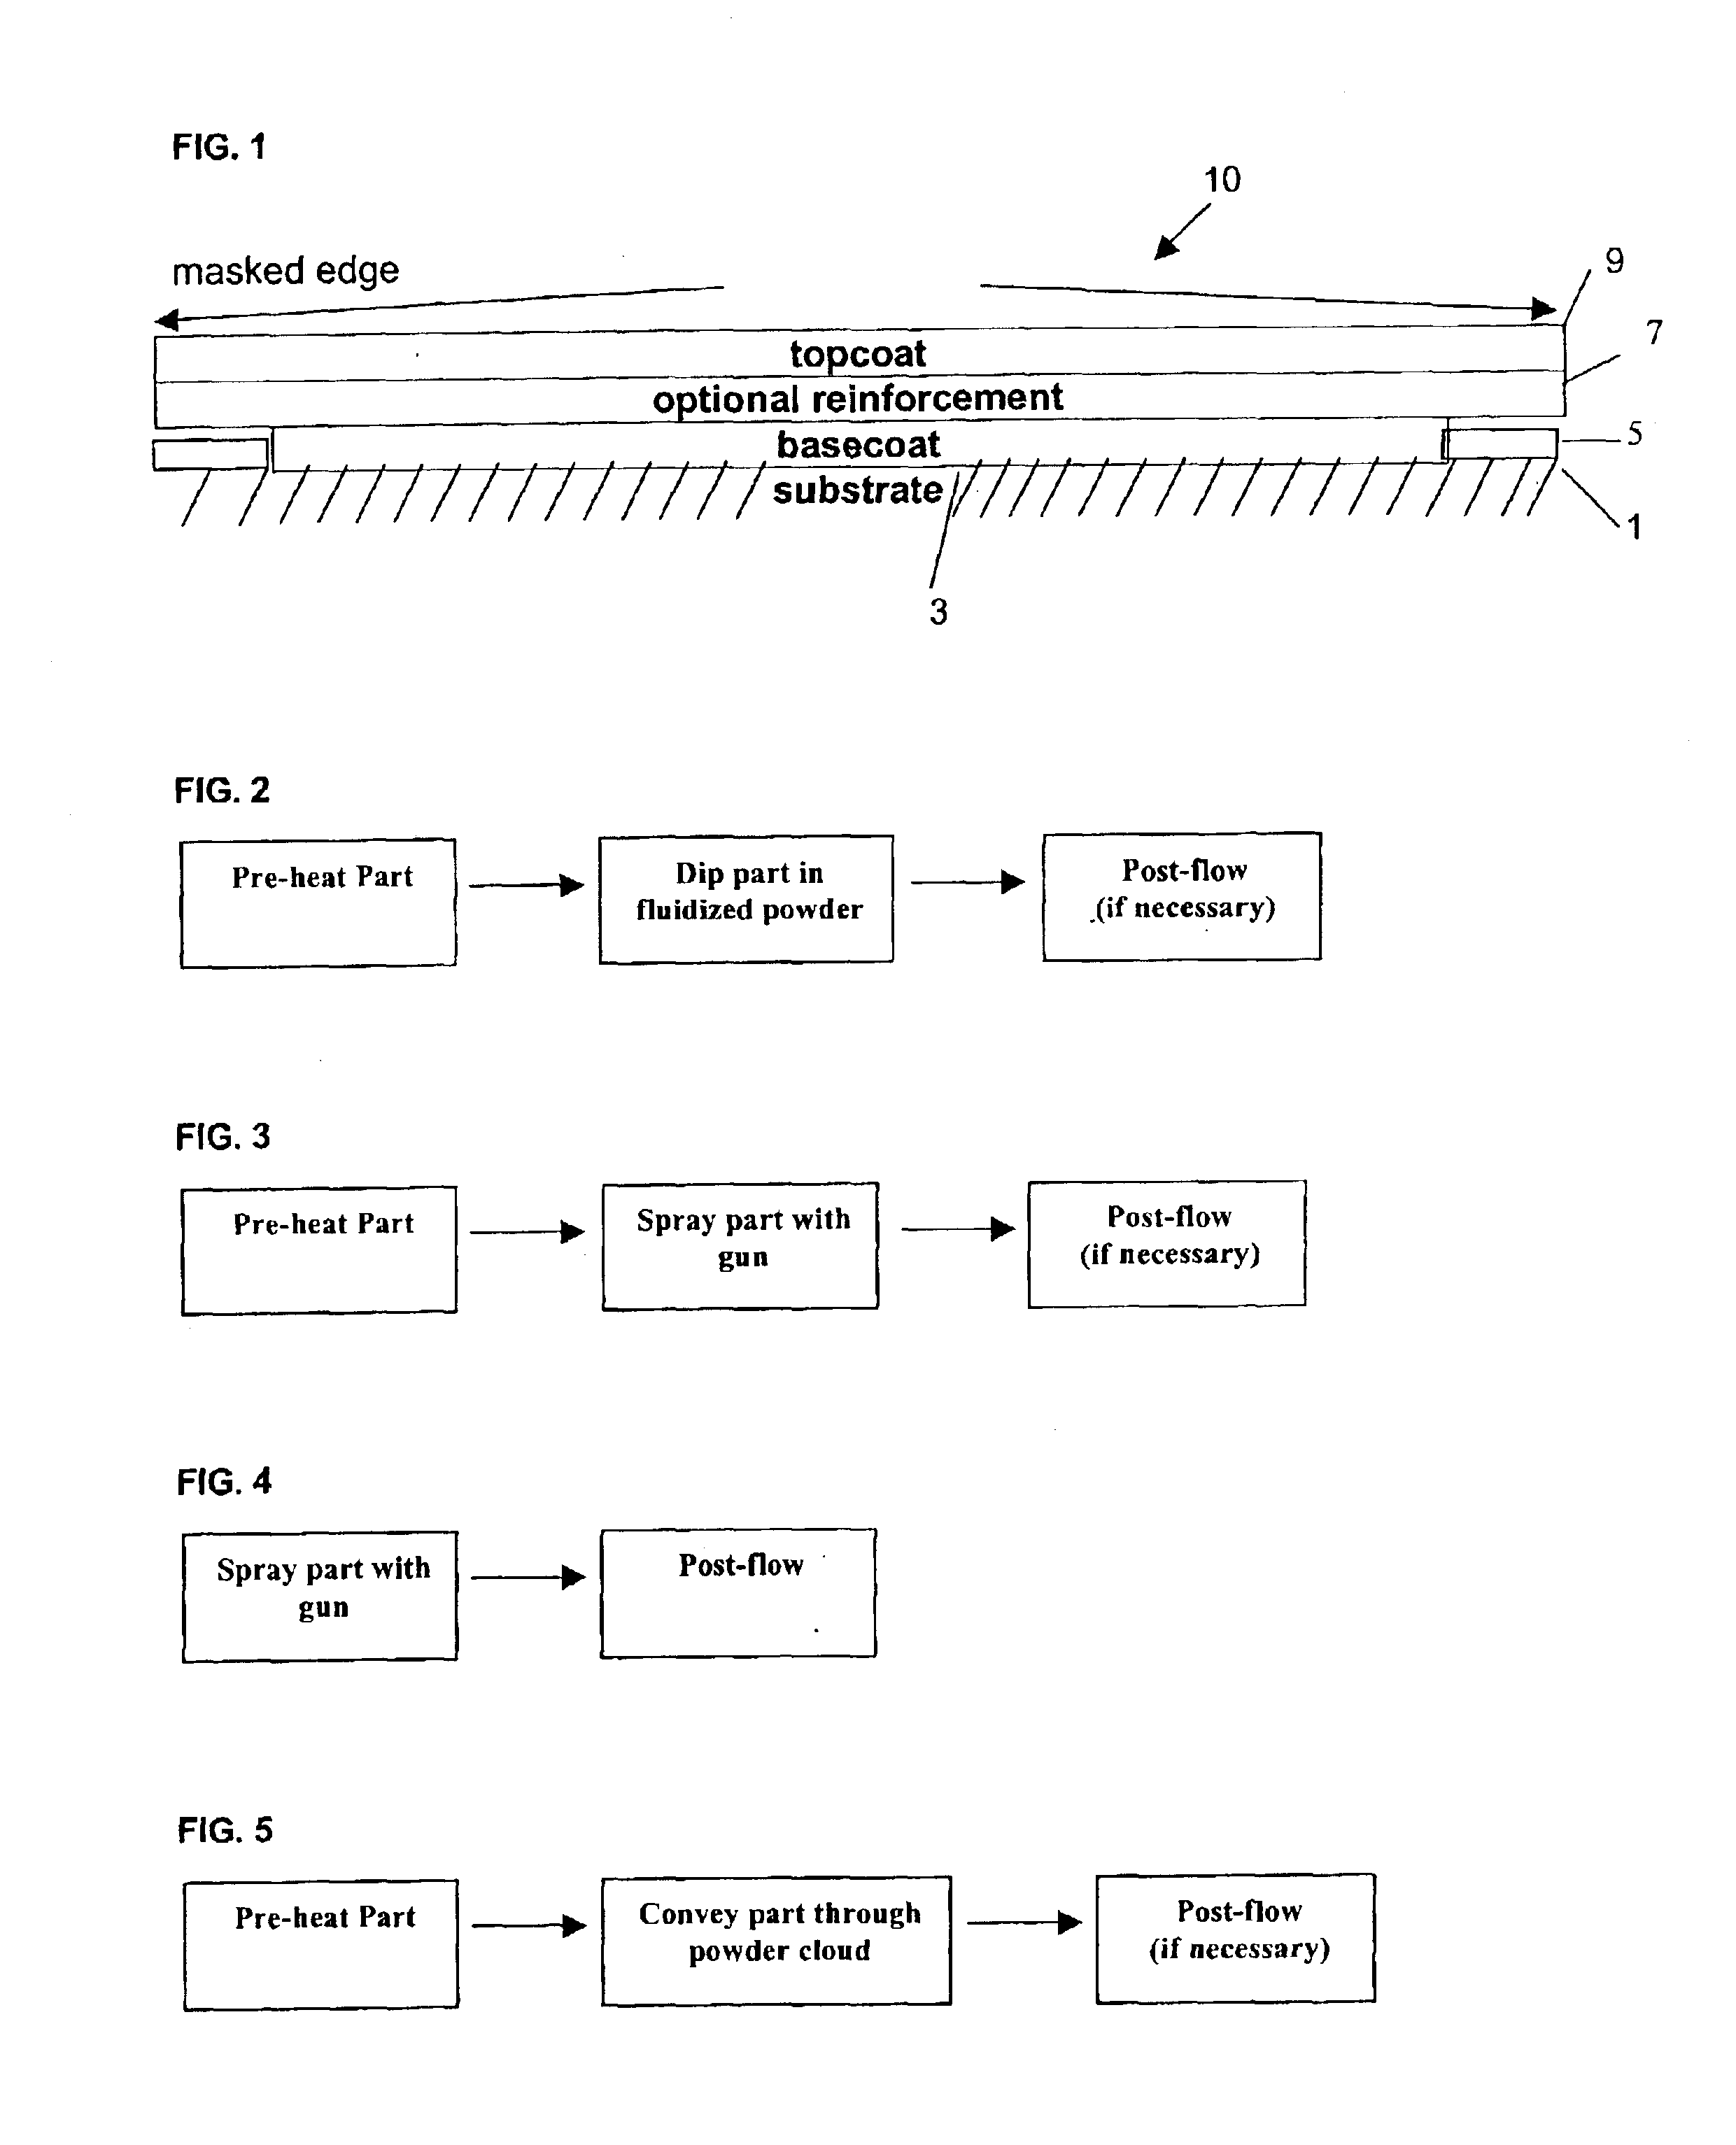 Coating system for a porous substrate using an asphalt-containing thermosetting basecoat composition and a thermoplastic top coat composition